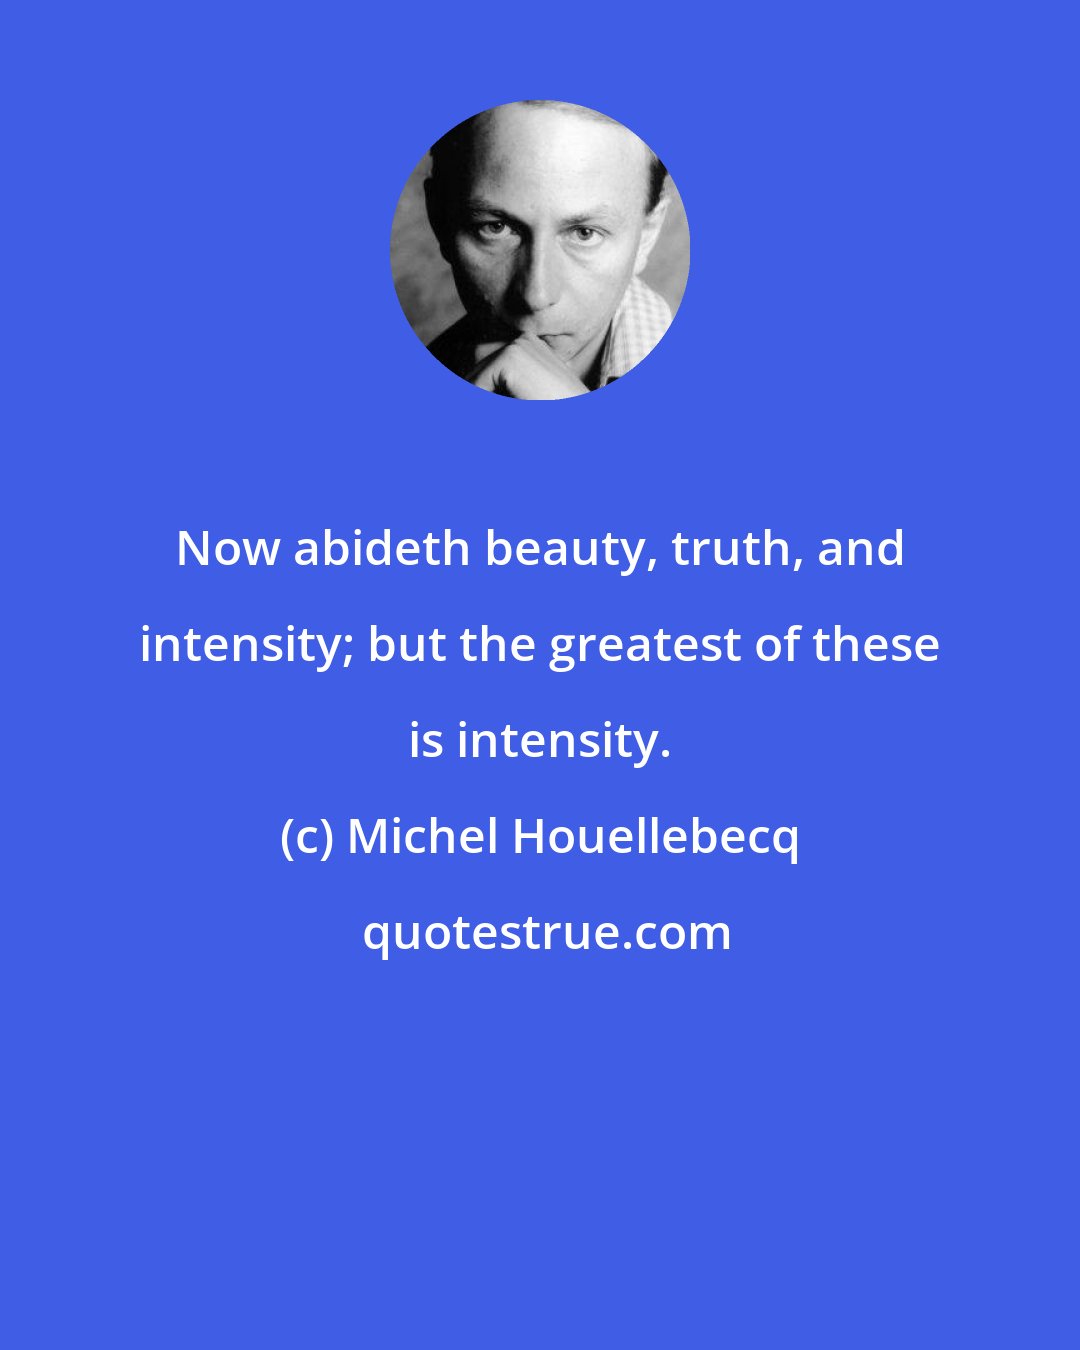 Michel Houellebecq: Now abideth beauty, truth, and intensity; but the greatest of these is intensity.